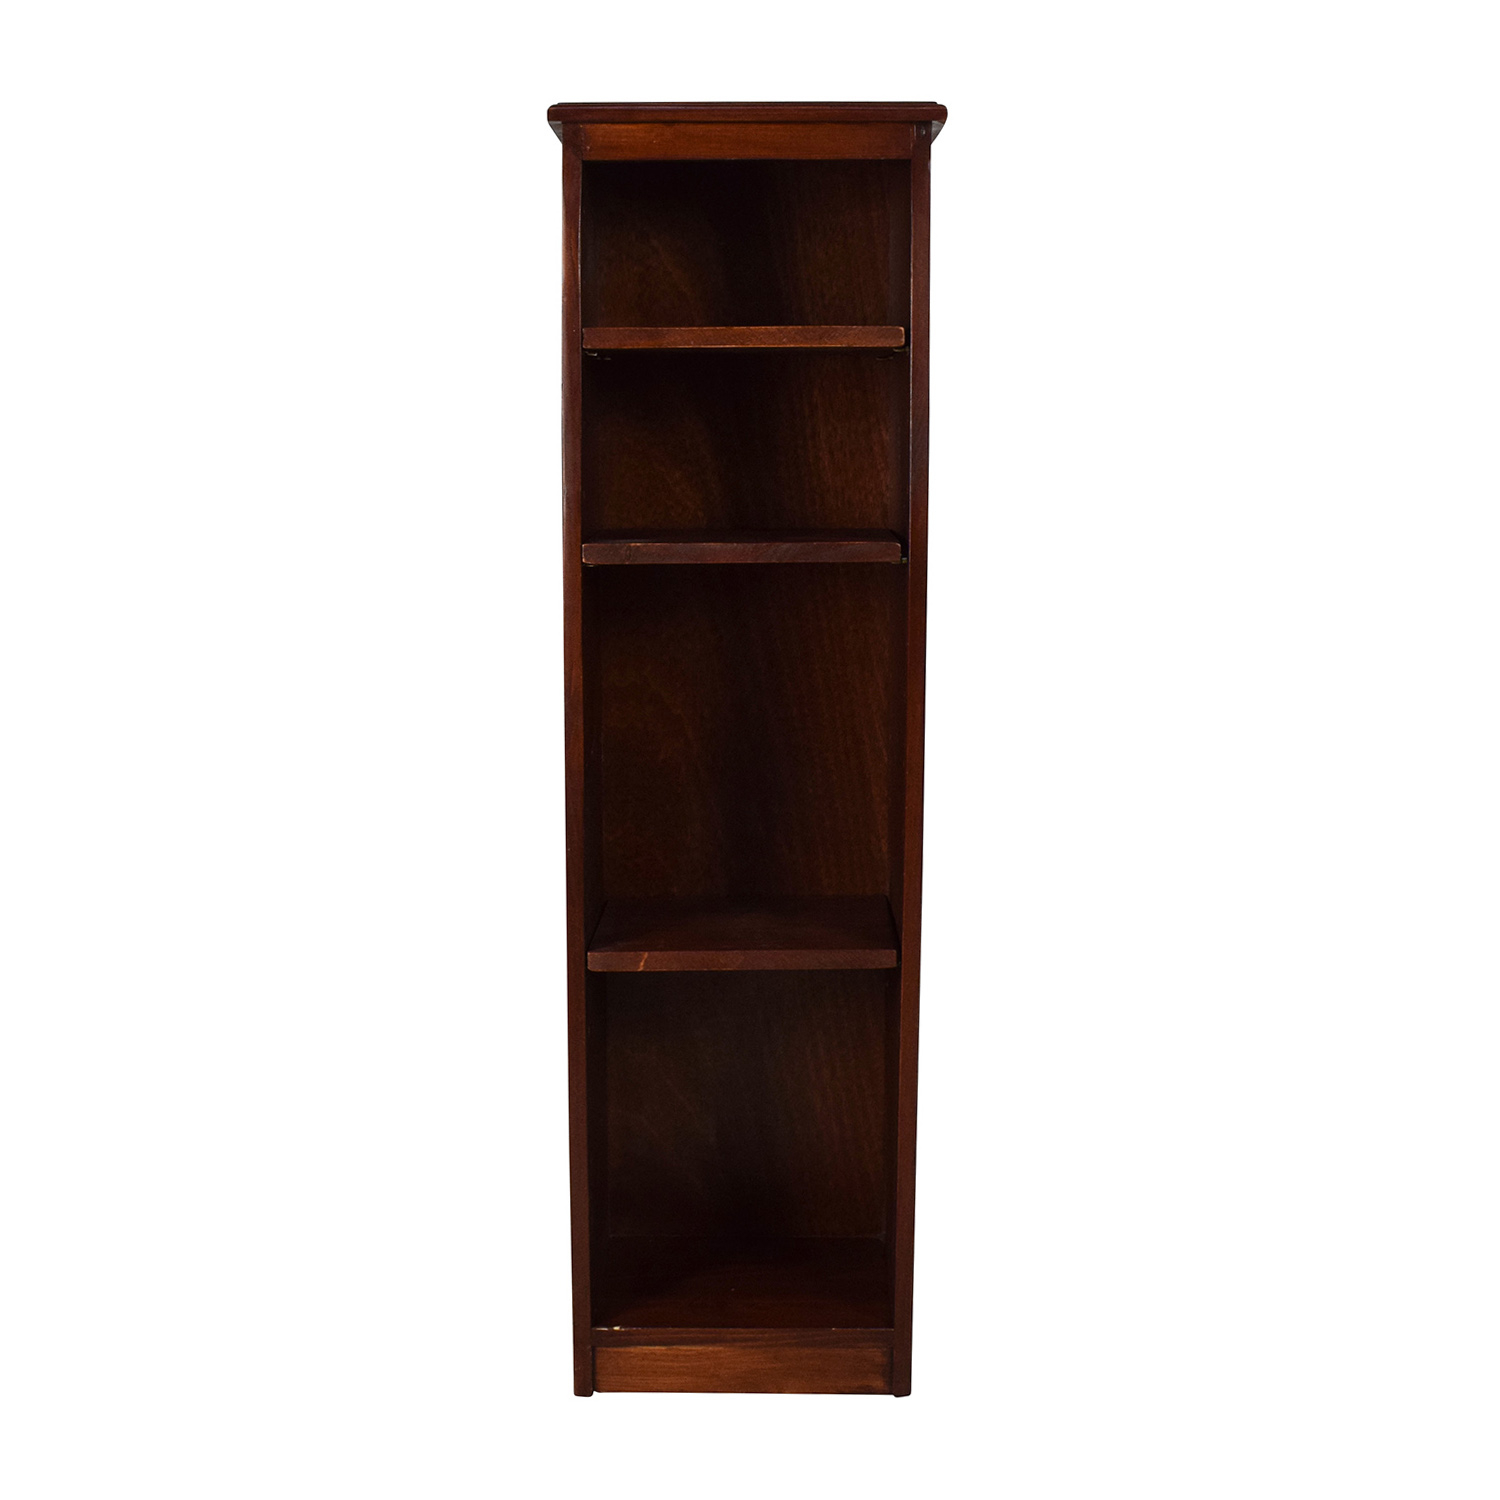 77 Off Gothic Cabinet Craft Gothic Furniture Small Wooden Bookshelf Storage intended for dimensions 1500 X 1500